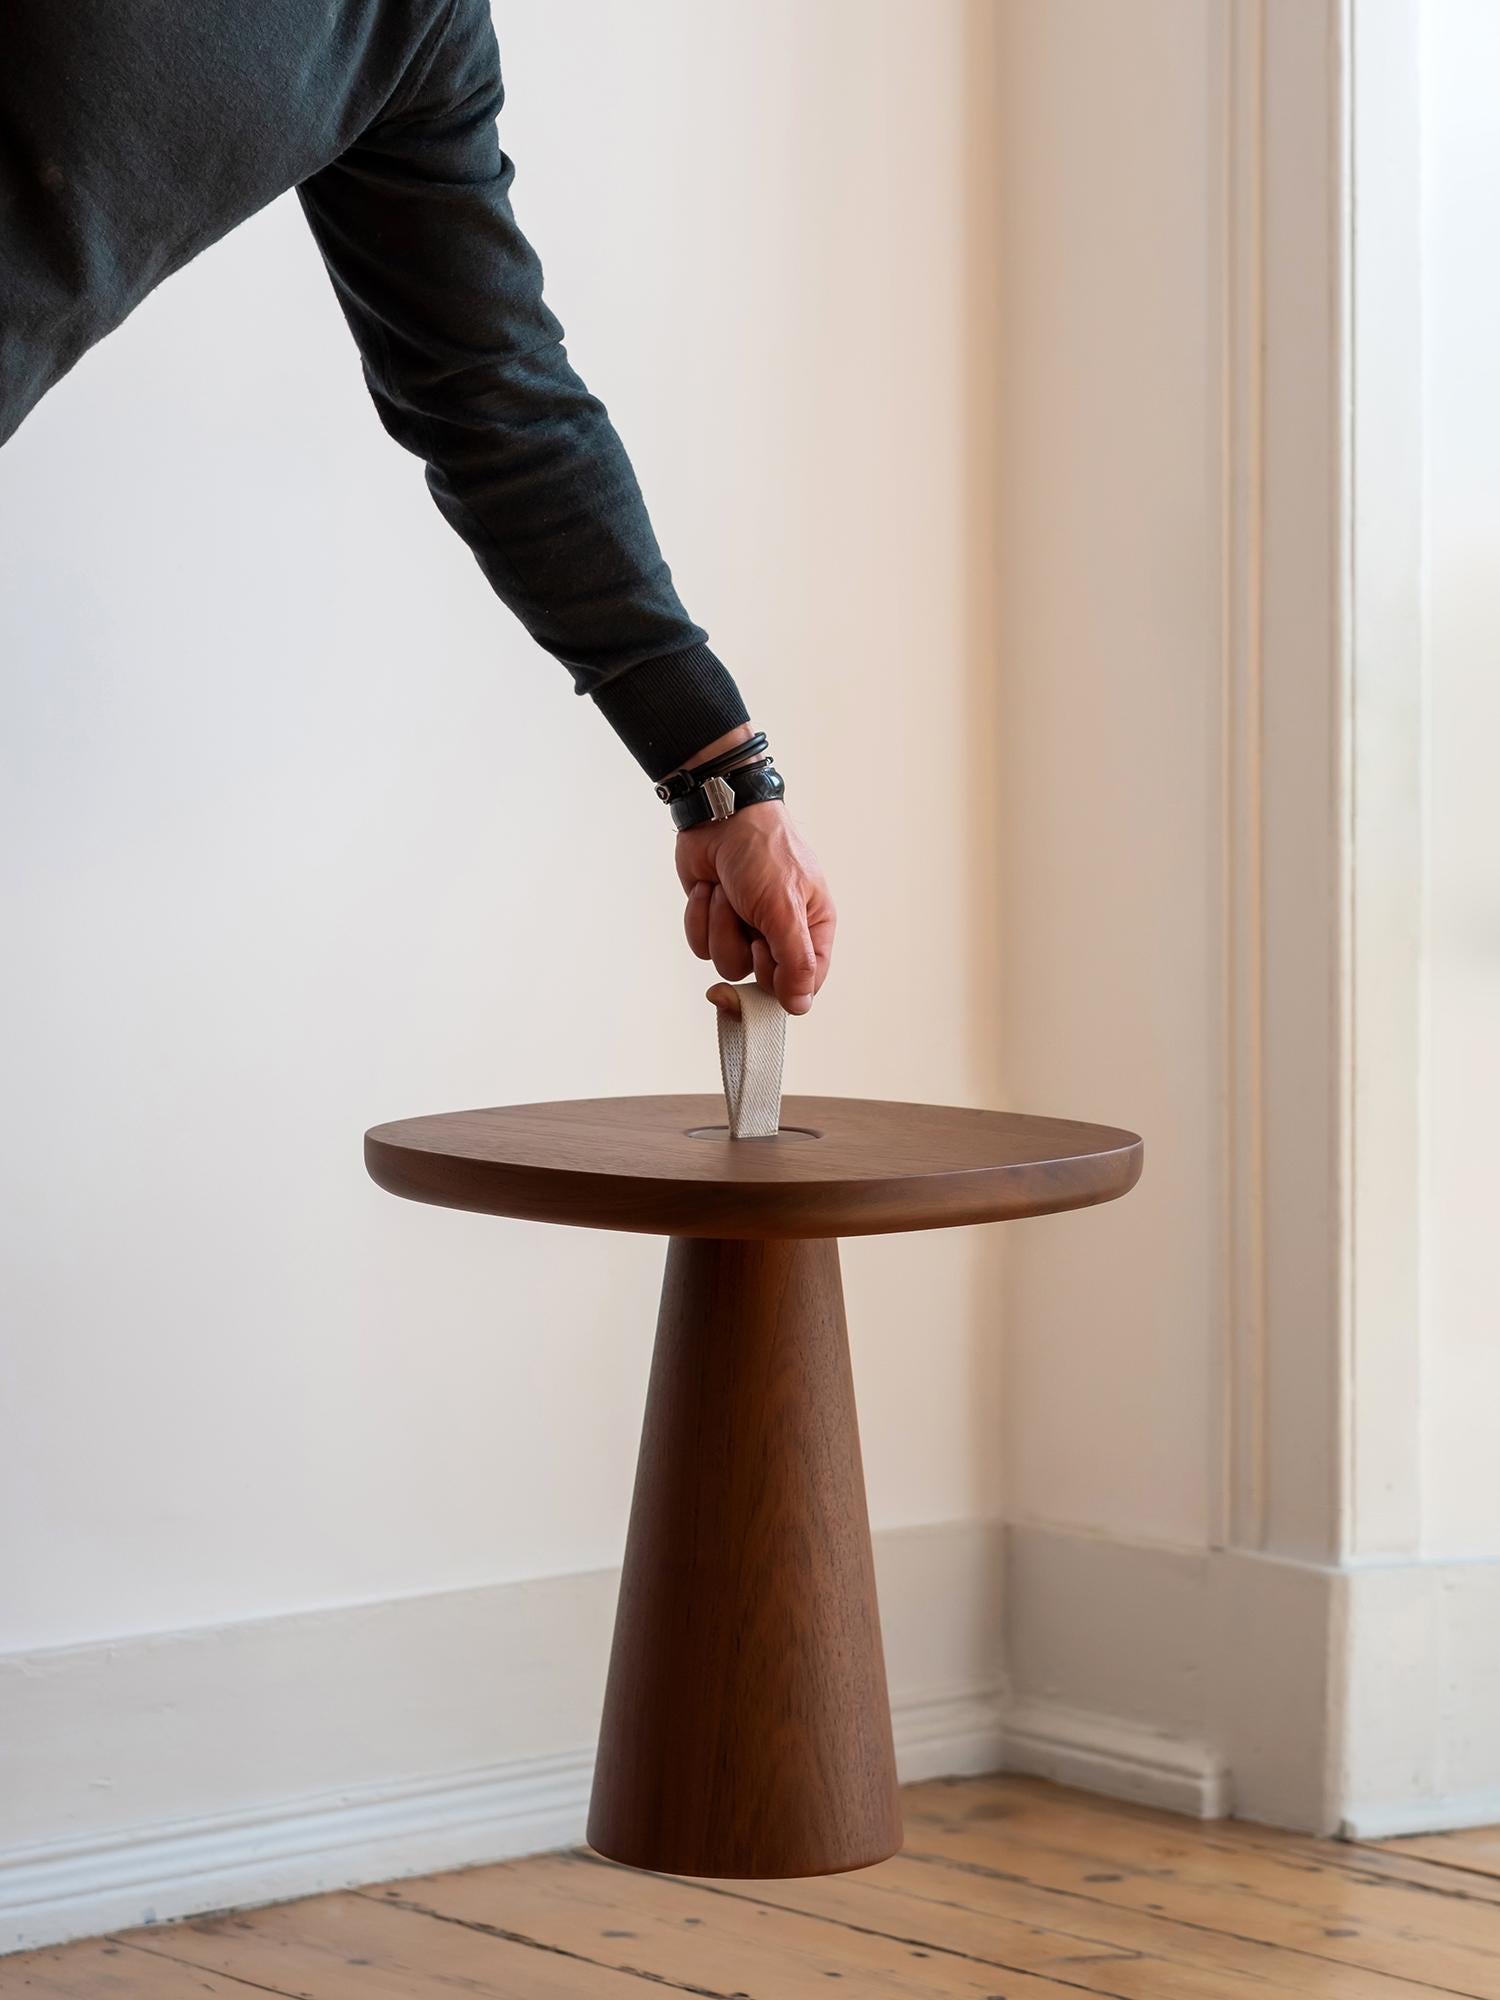 Hand-Crafted Minimalist Modern Side Table in Walnut and Black Leather Strap For Sale